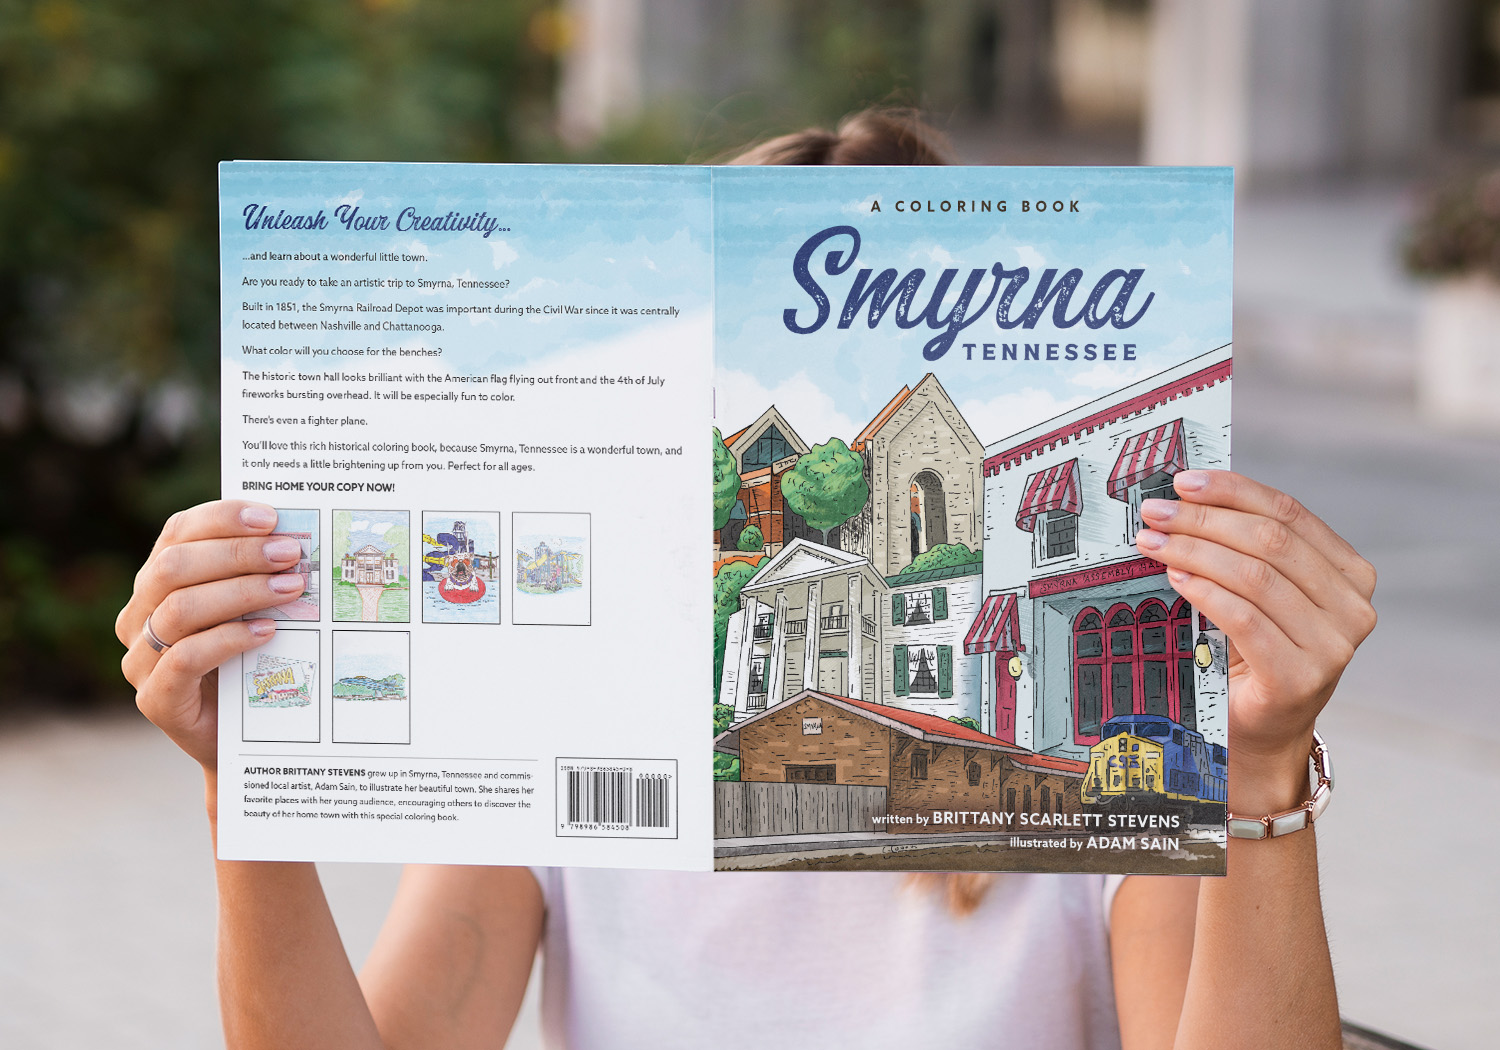 Smyrna, Tennessee - a coloring book front and back cover design